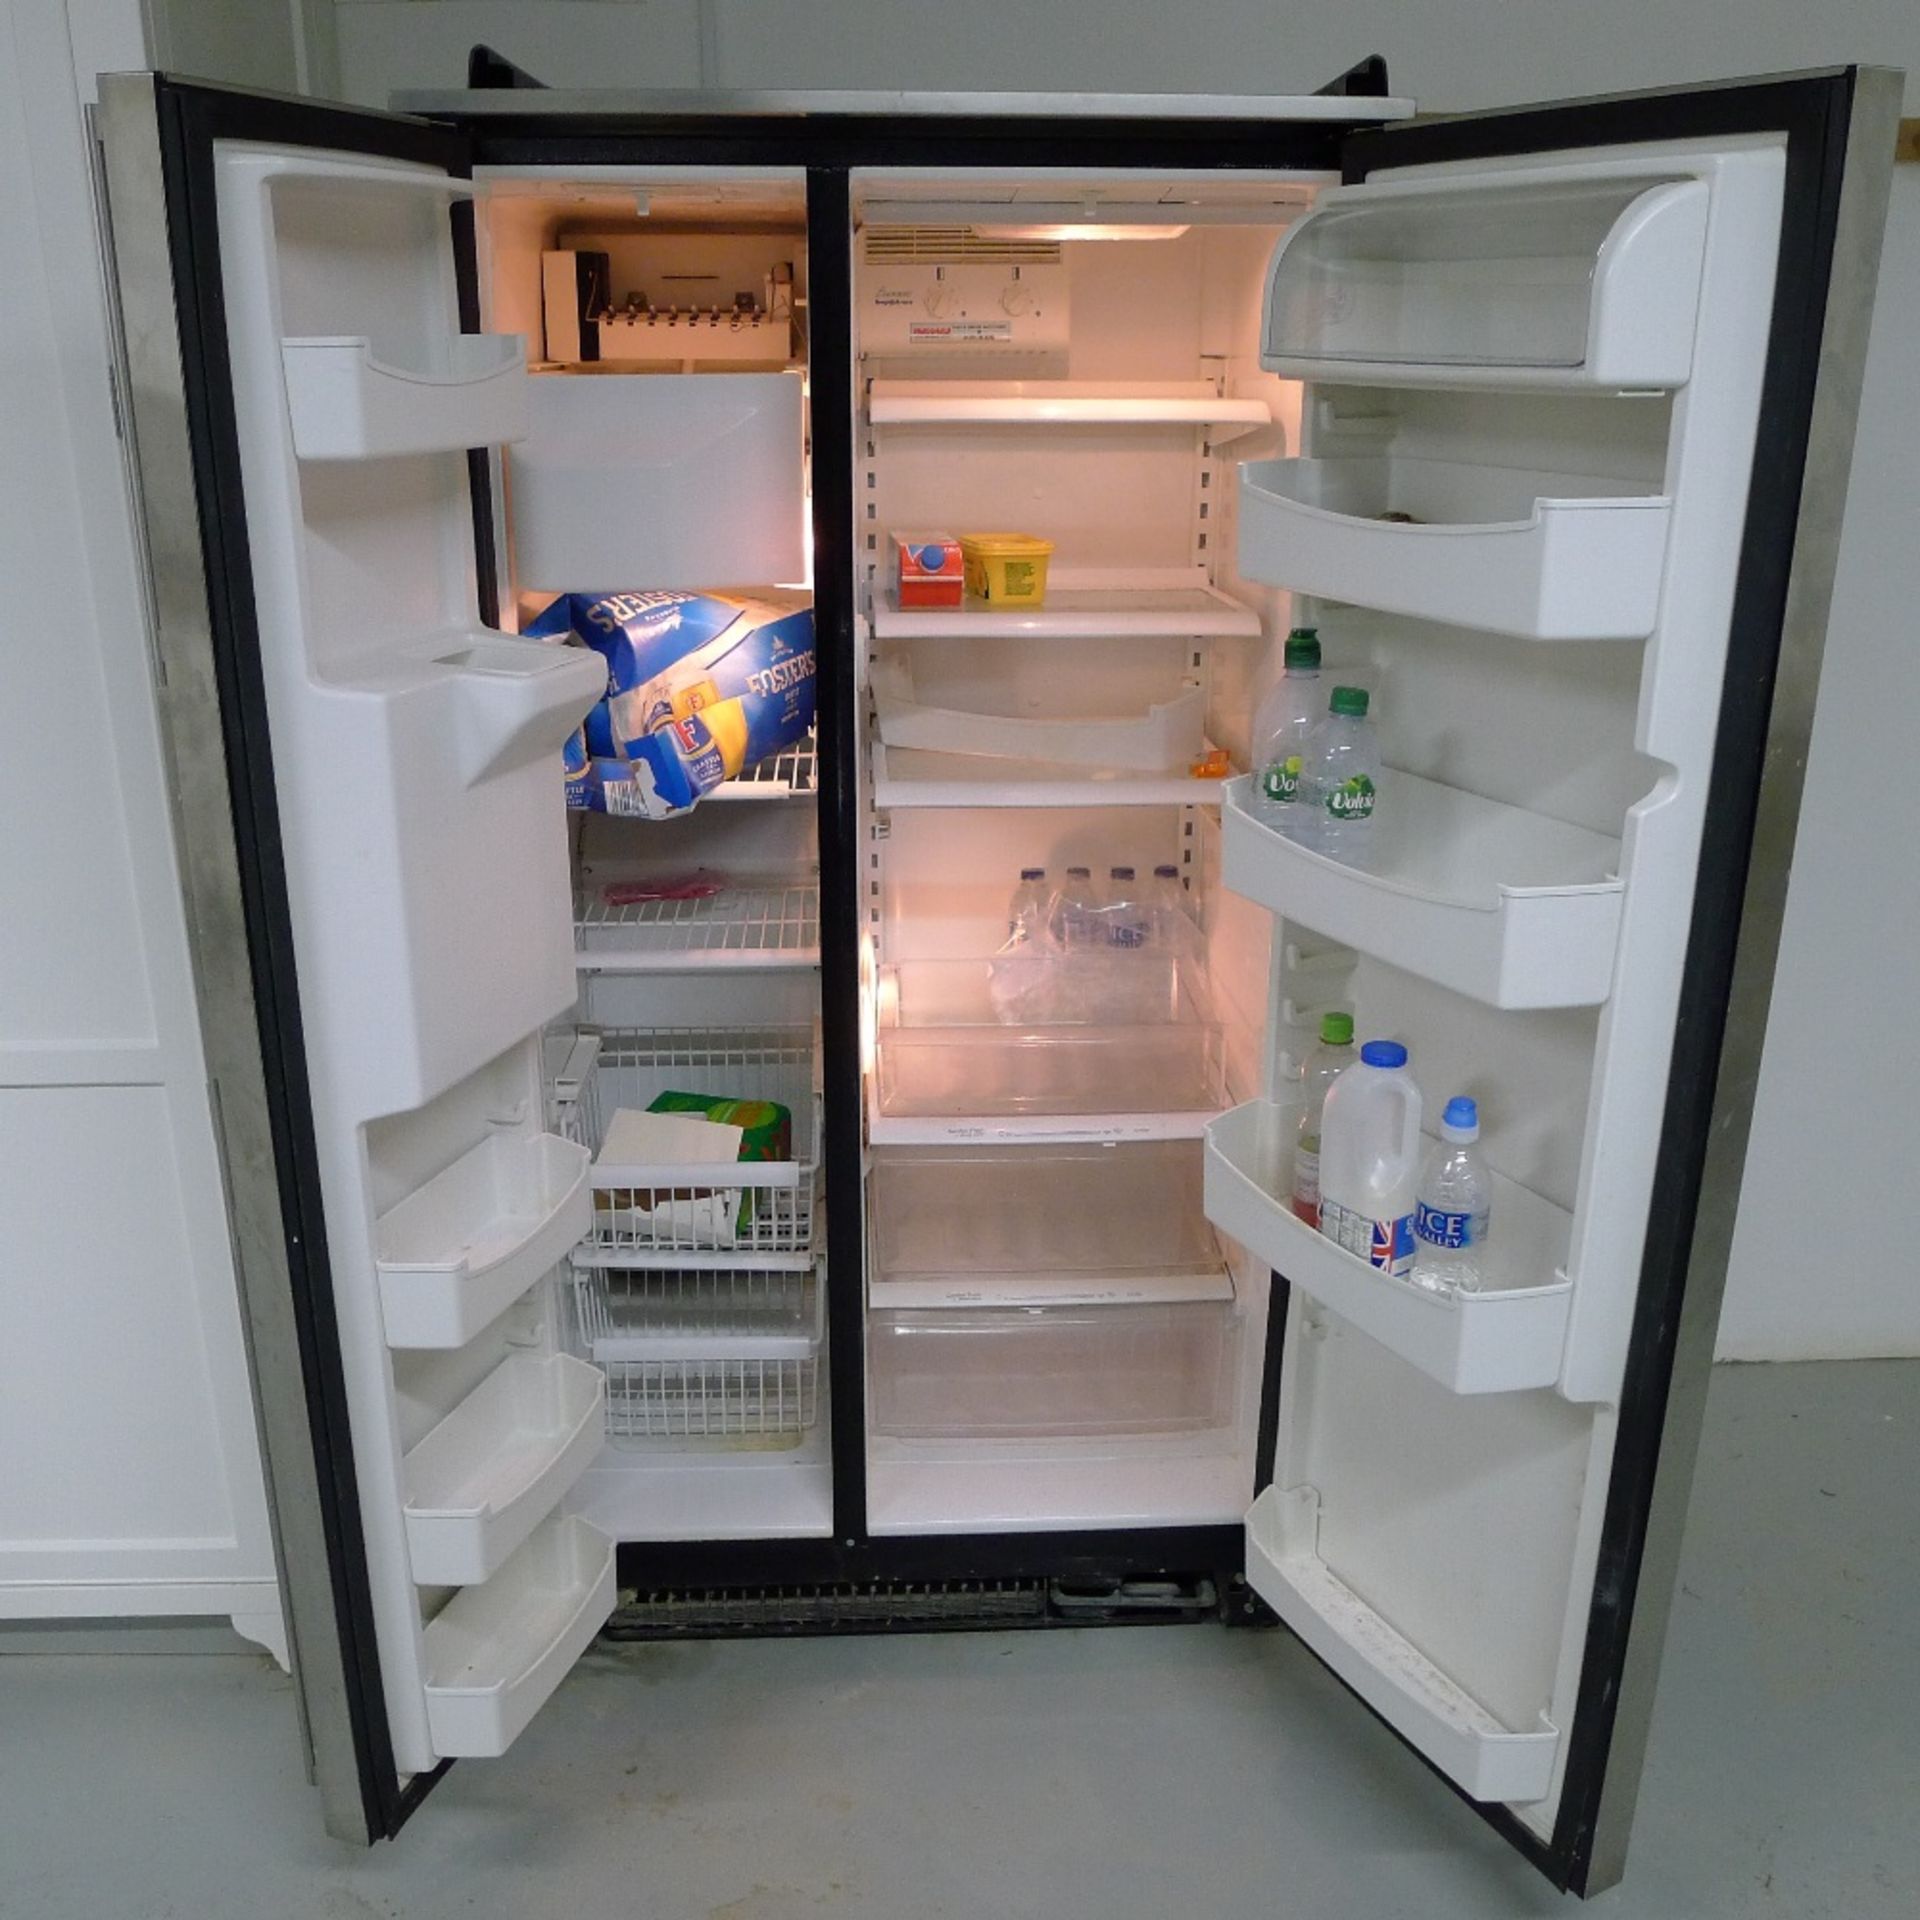 1 American style double door fridge freezer by Amana, 2 microwaves, 2 kettles, 1 sandwich toaster - Image 2 of 4